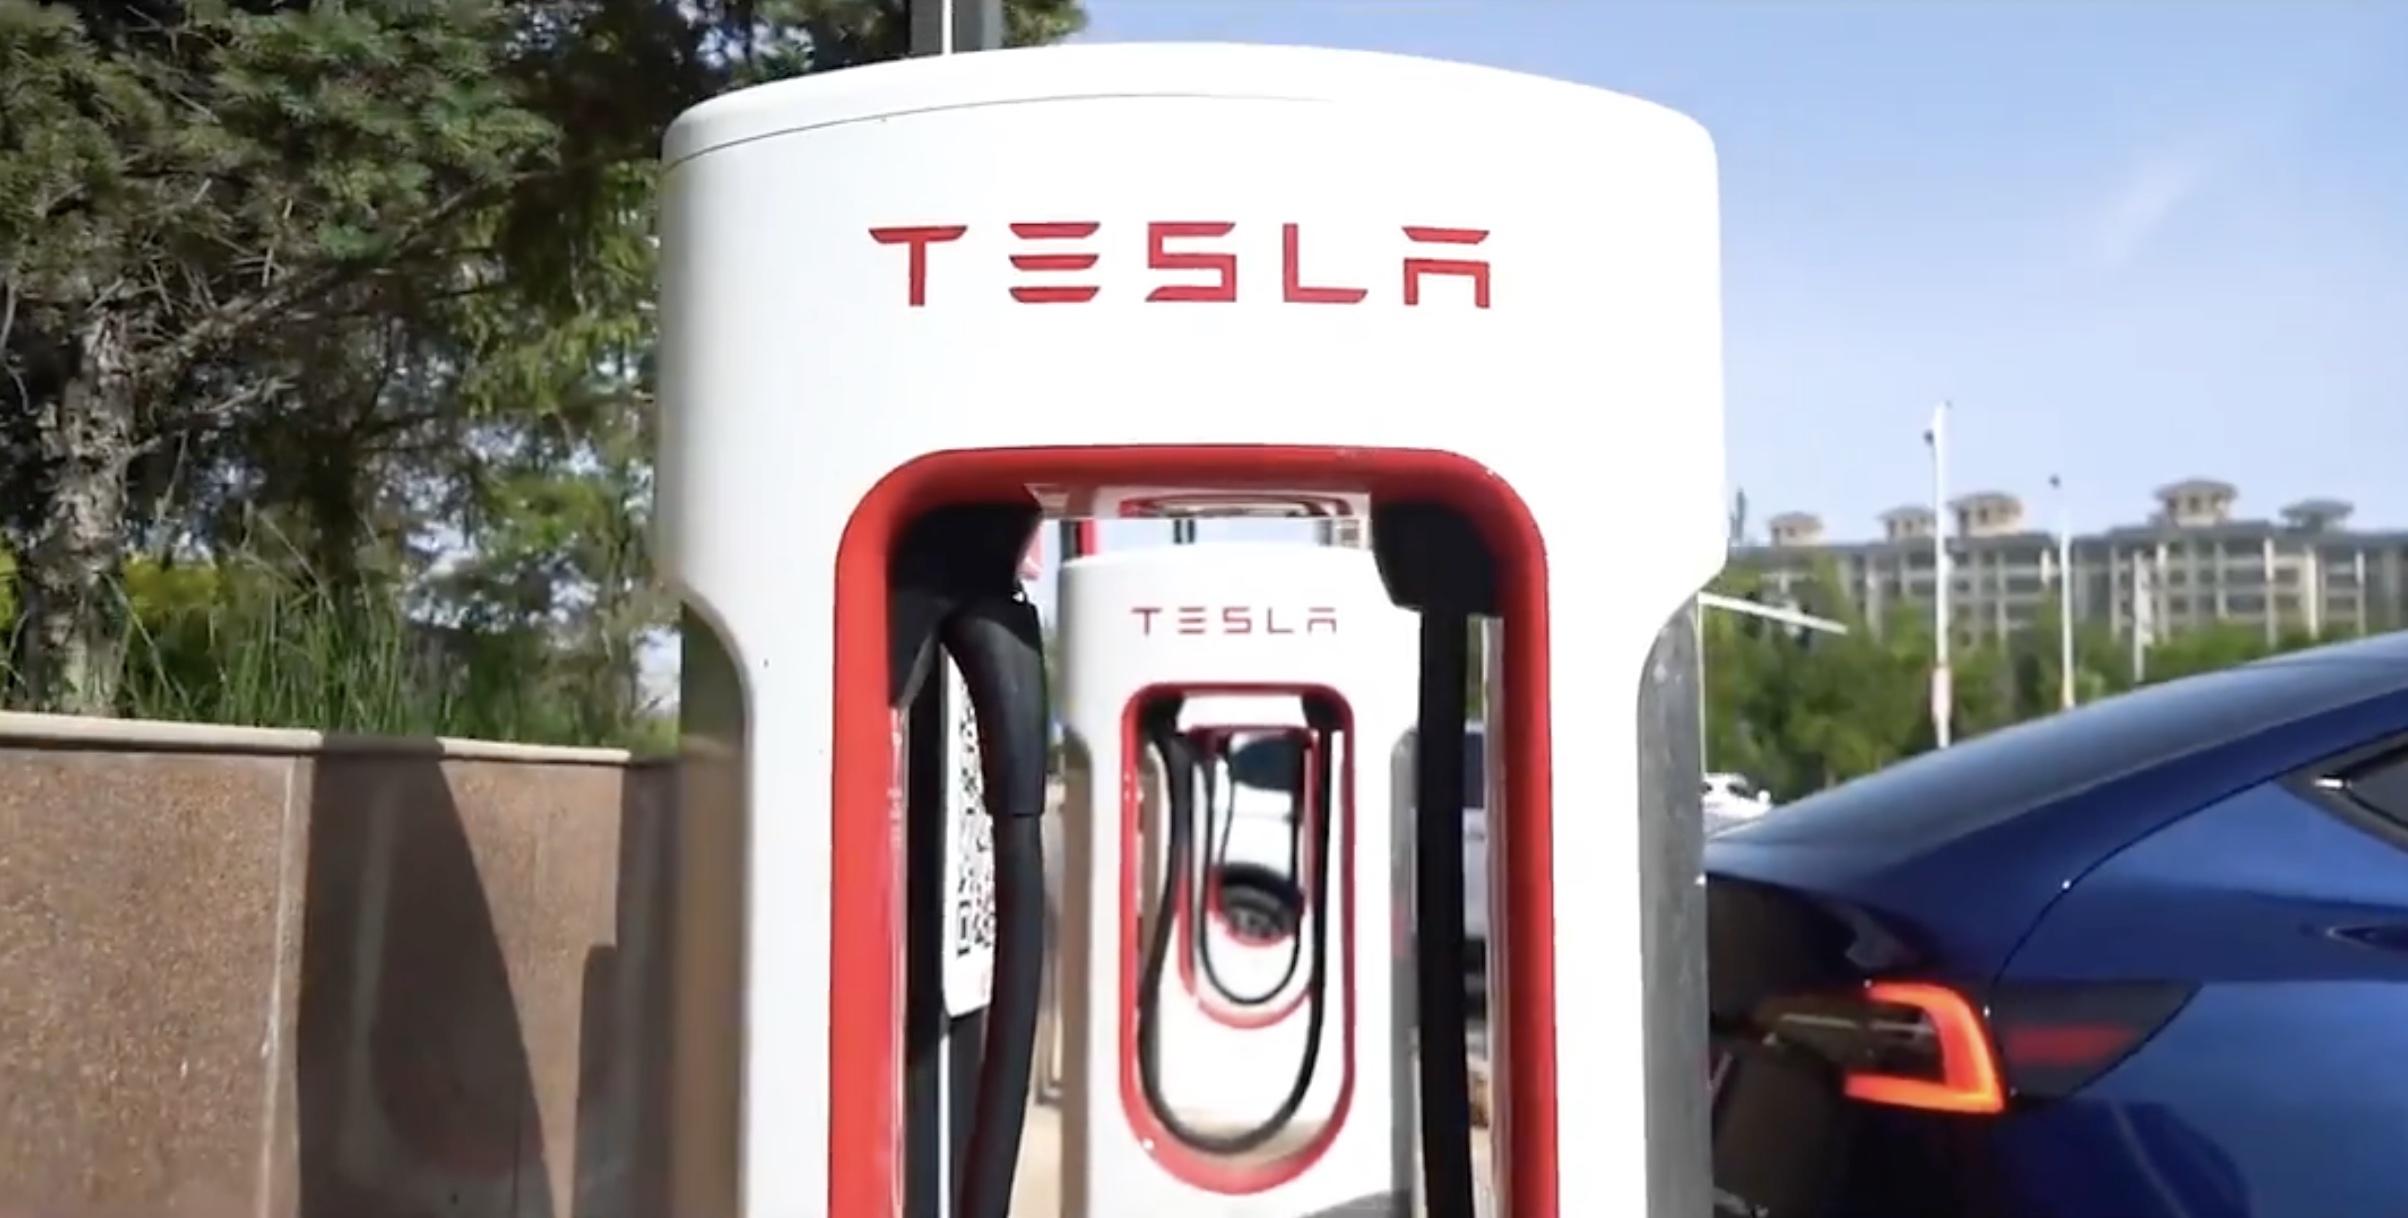 Tesla opens longest Supercharger route from east to west along China's historic Silk Road